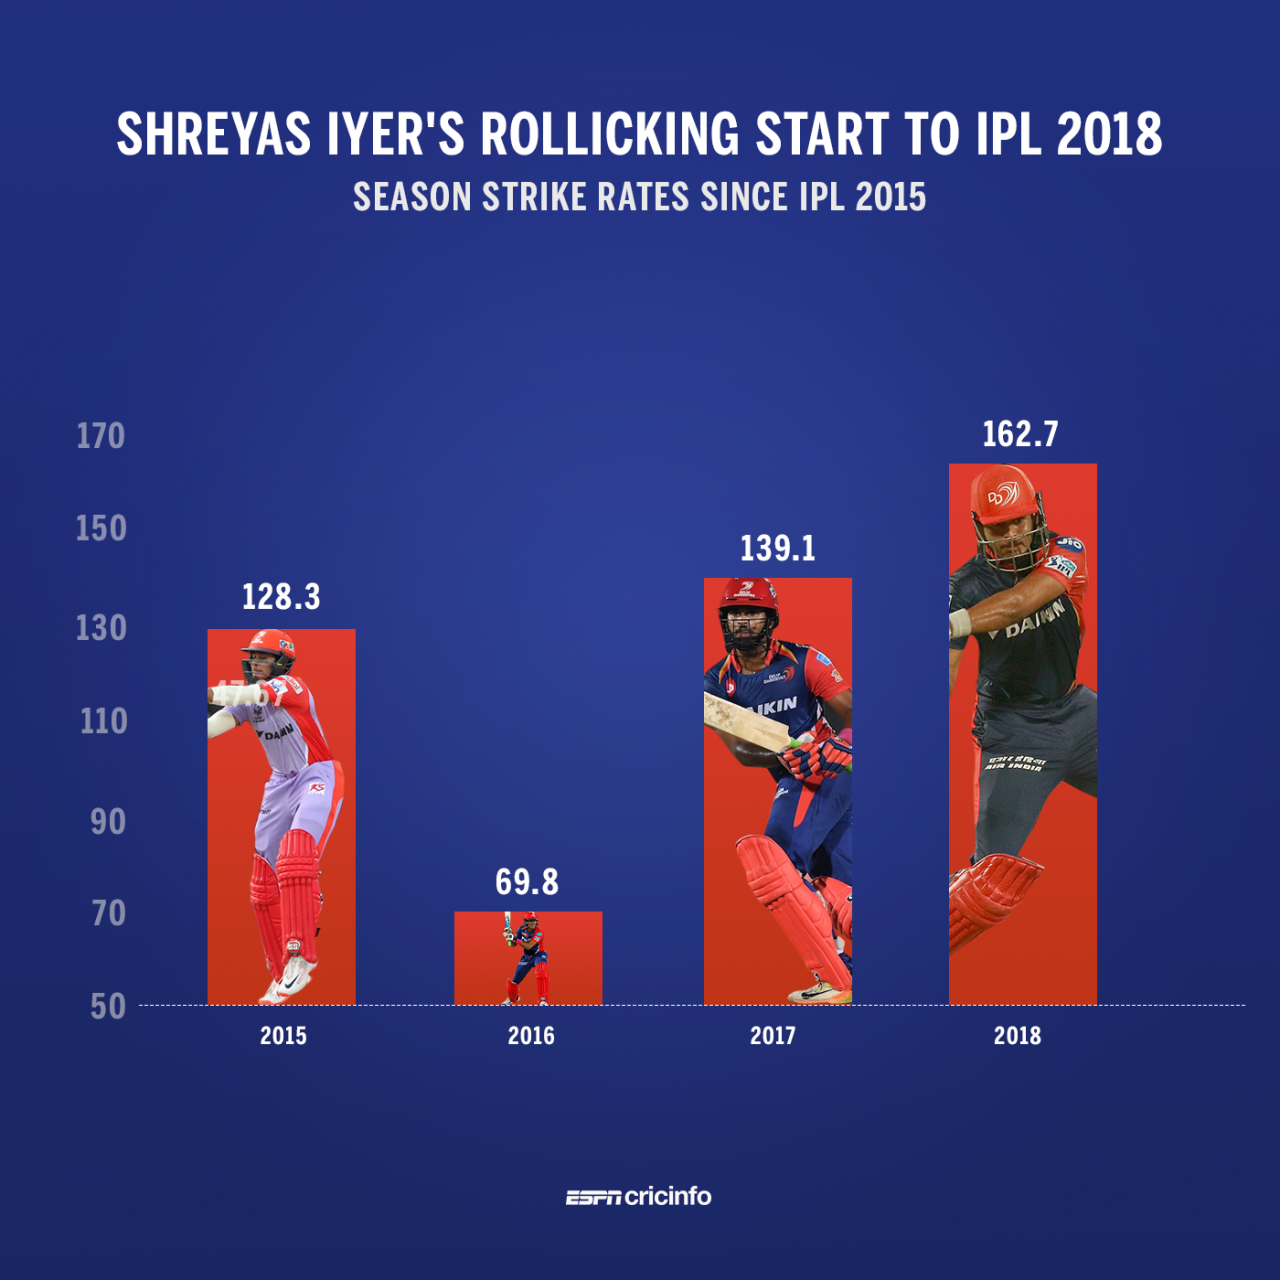 Shreyas Iyer has 244 runs from seven innings so far in IPL 2018, at a phenomenal strike rate of 162.7